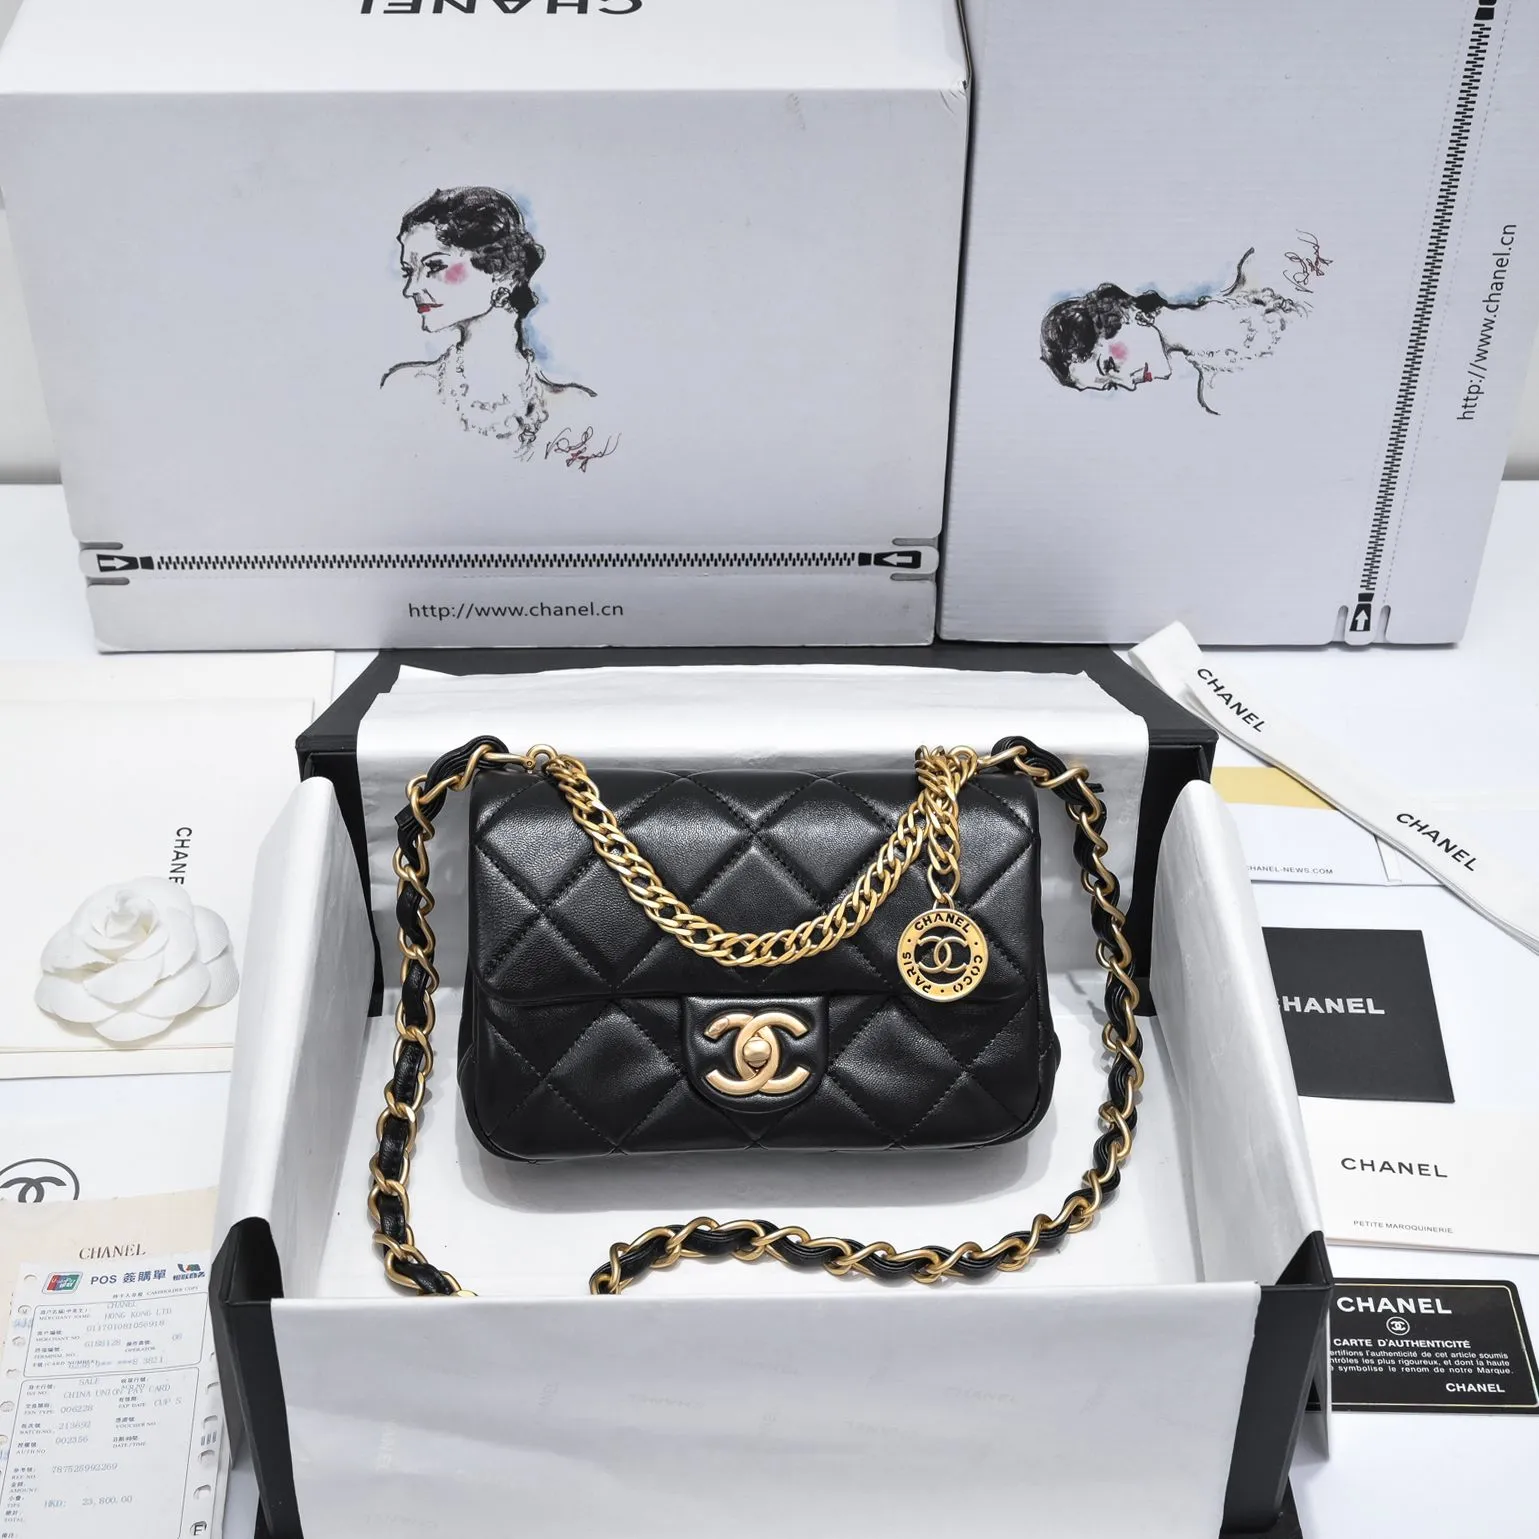 CHANEL---23S minicf, Gallery posted by GZ.Aily